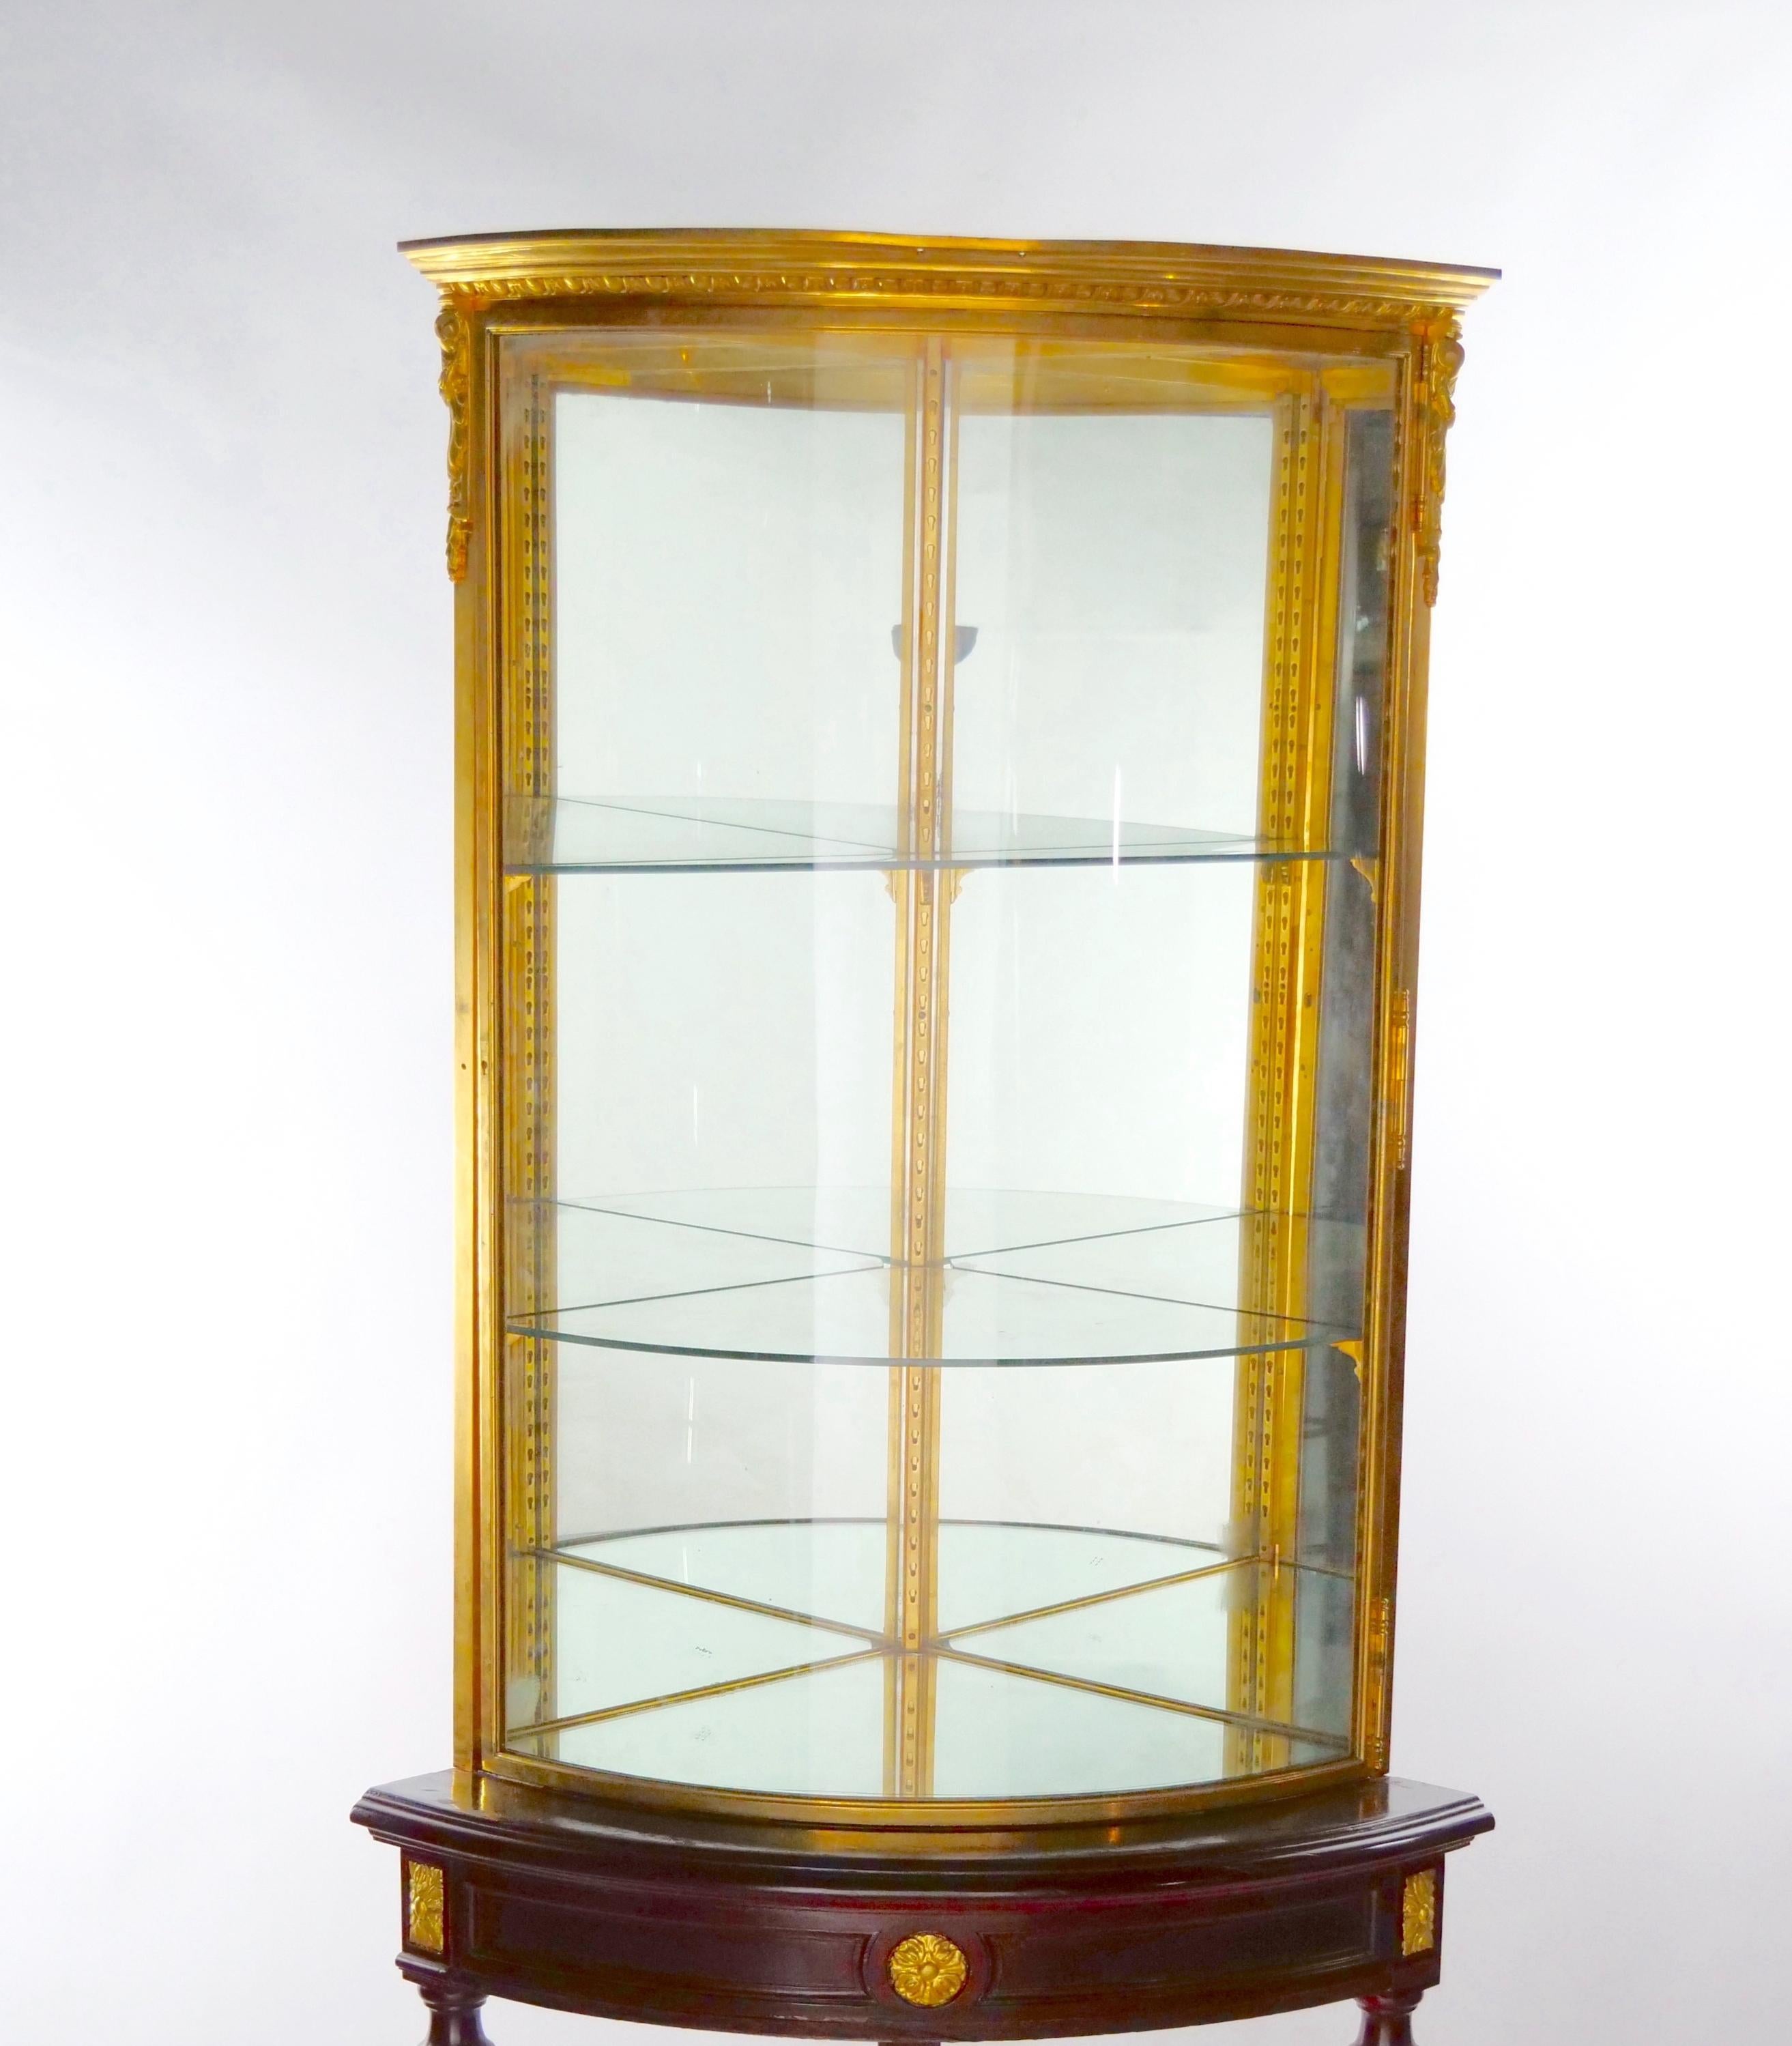 French two piece gilt bronze mounted and glass frame with gilt accent mahogany wood frame holding base curio cornered display cabinet. The curio / vitrine cornered cabinet features a demilune shape, gilt wood legs with a Y shape stretcher bar with a